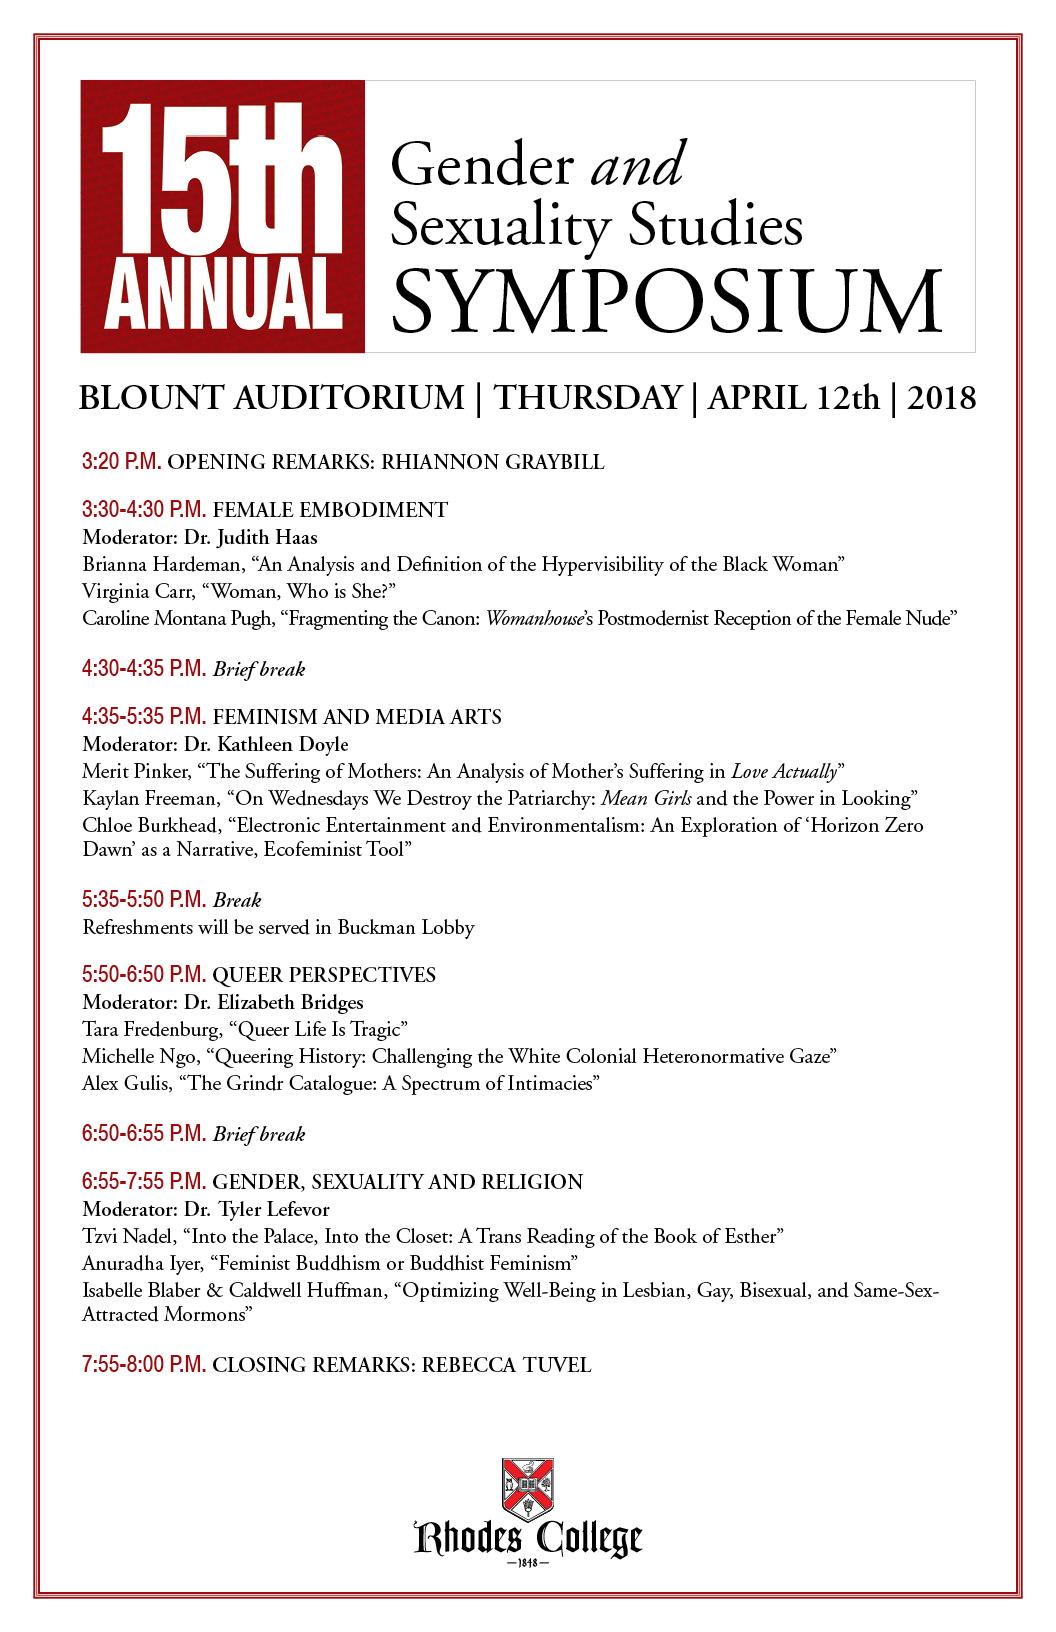 A listing of all the symposium panels